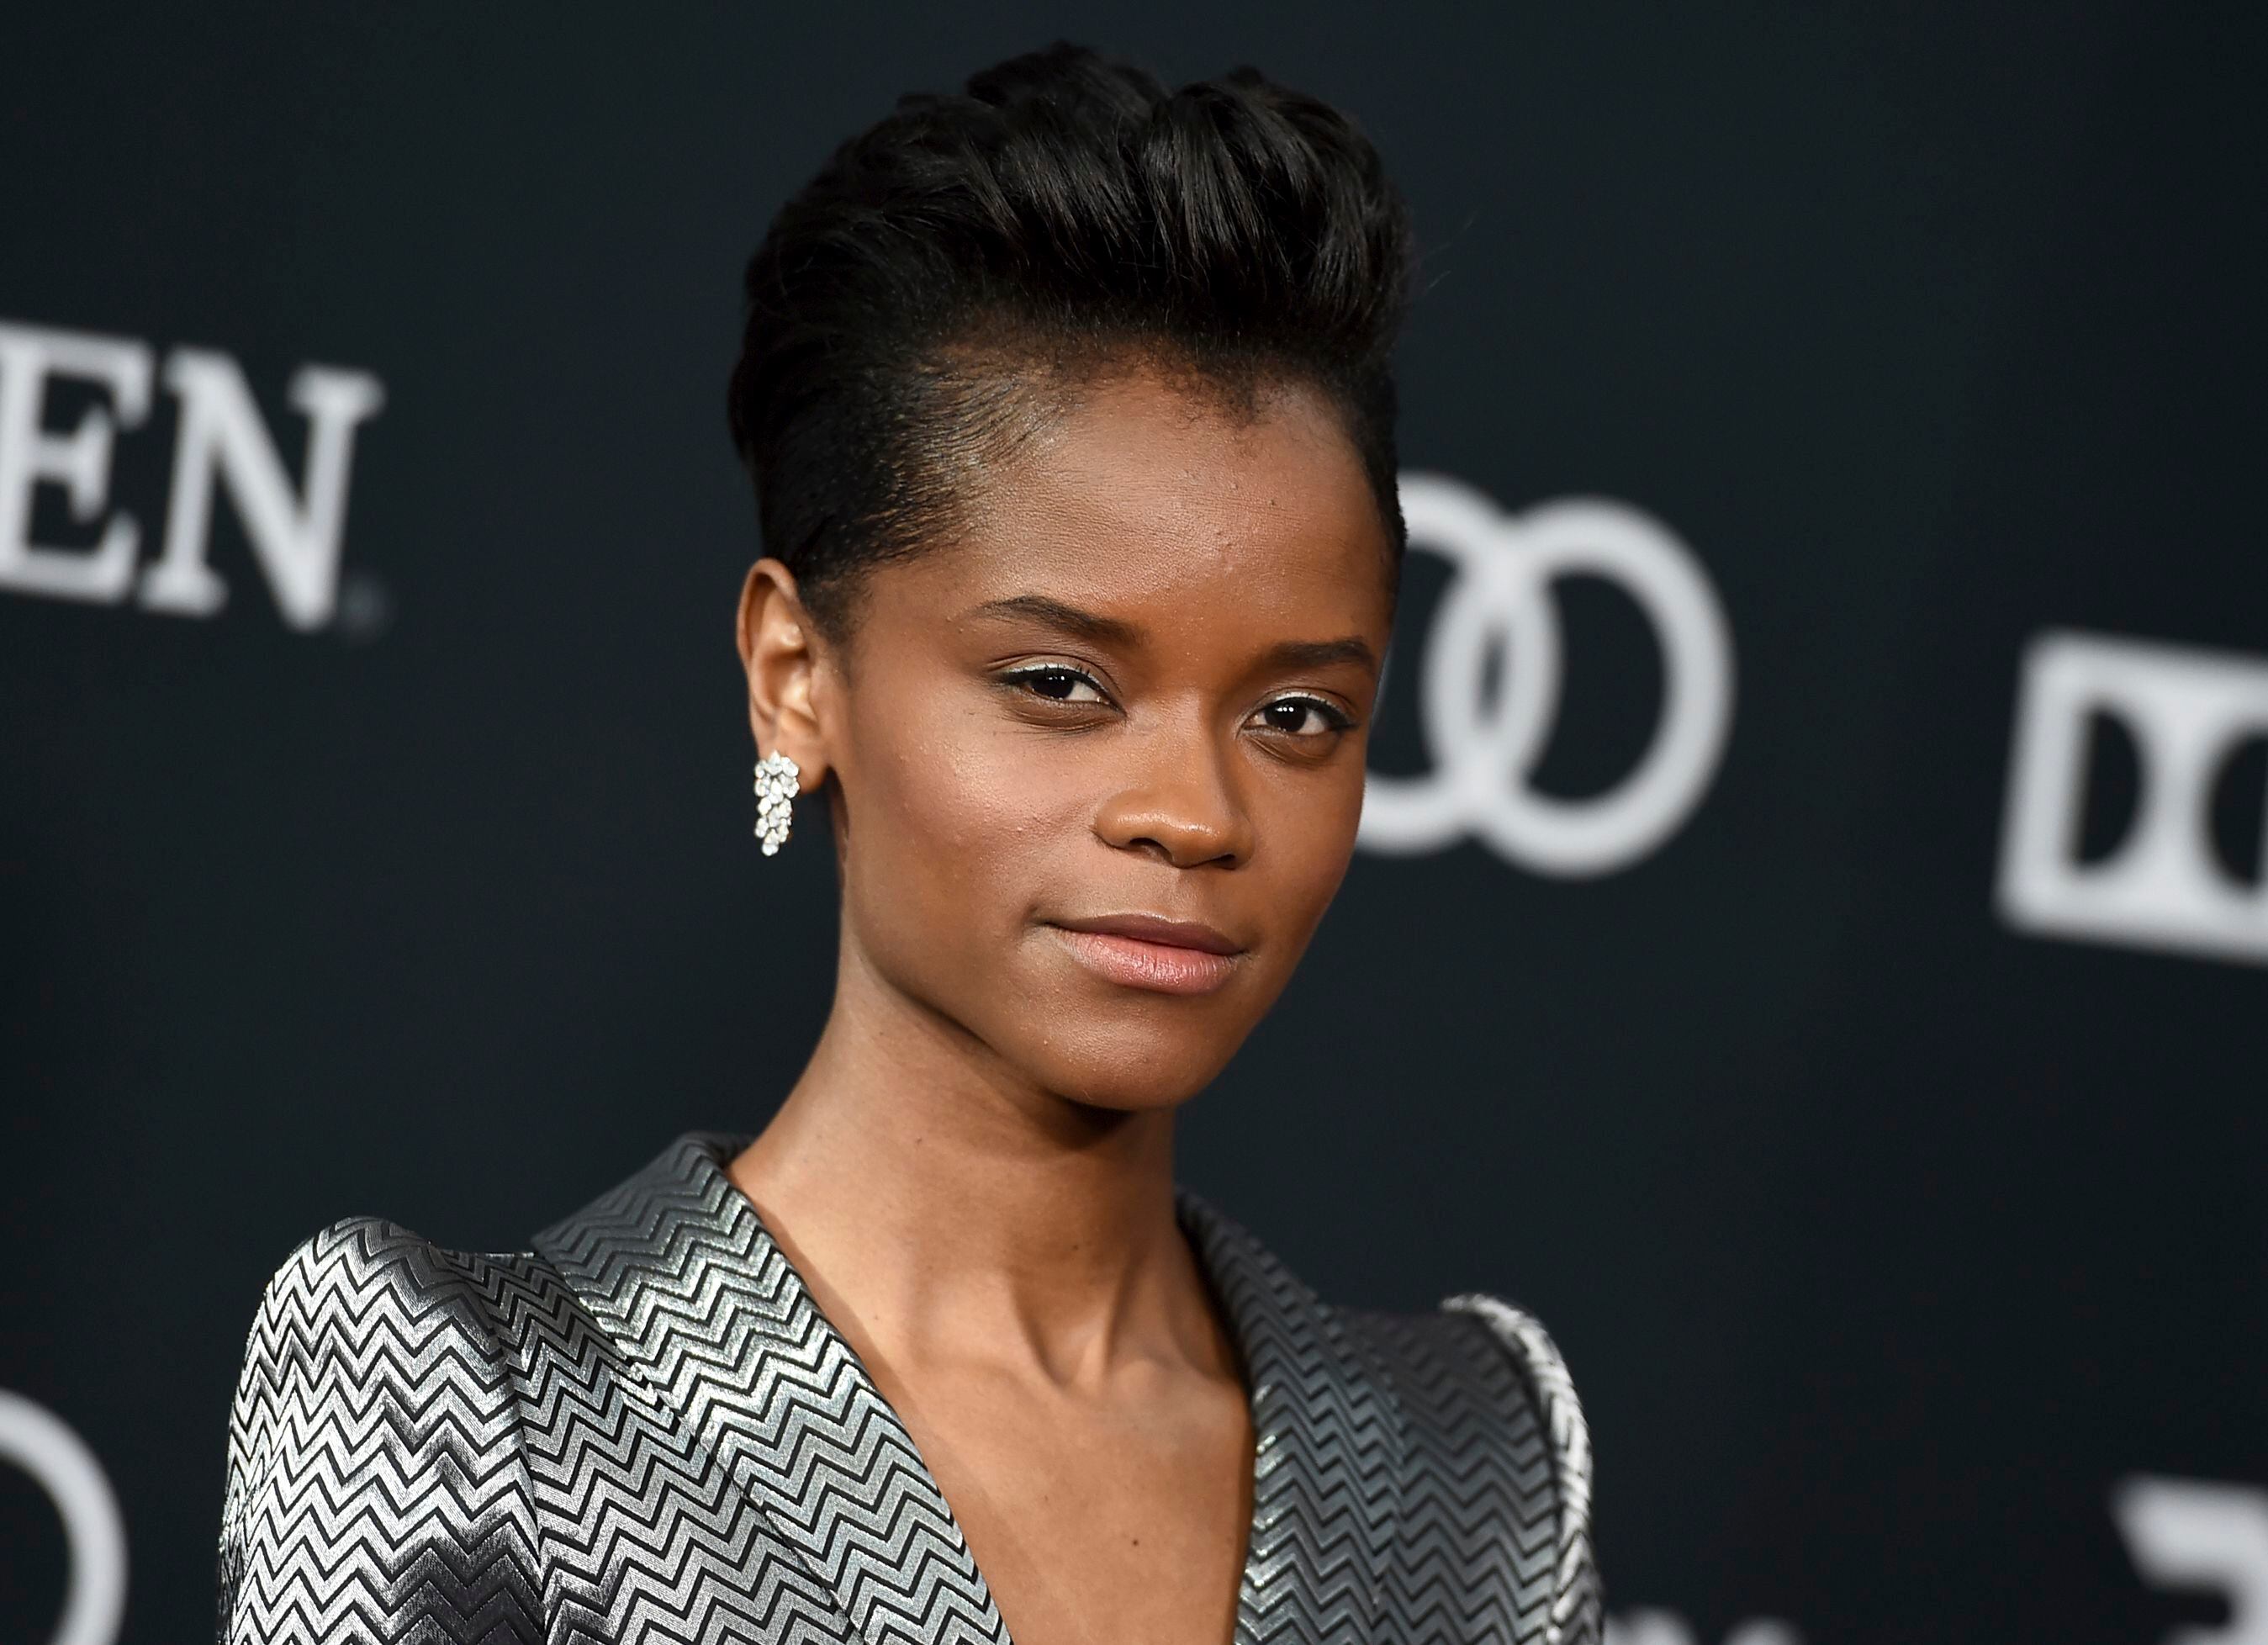 Letitia Wright injured filming stunt on ‘Black Panther 2’